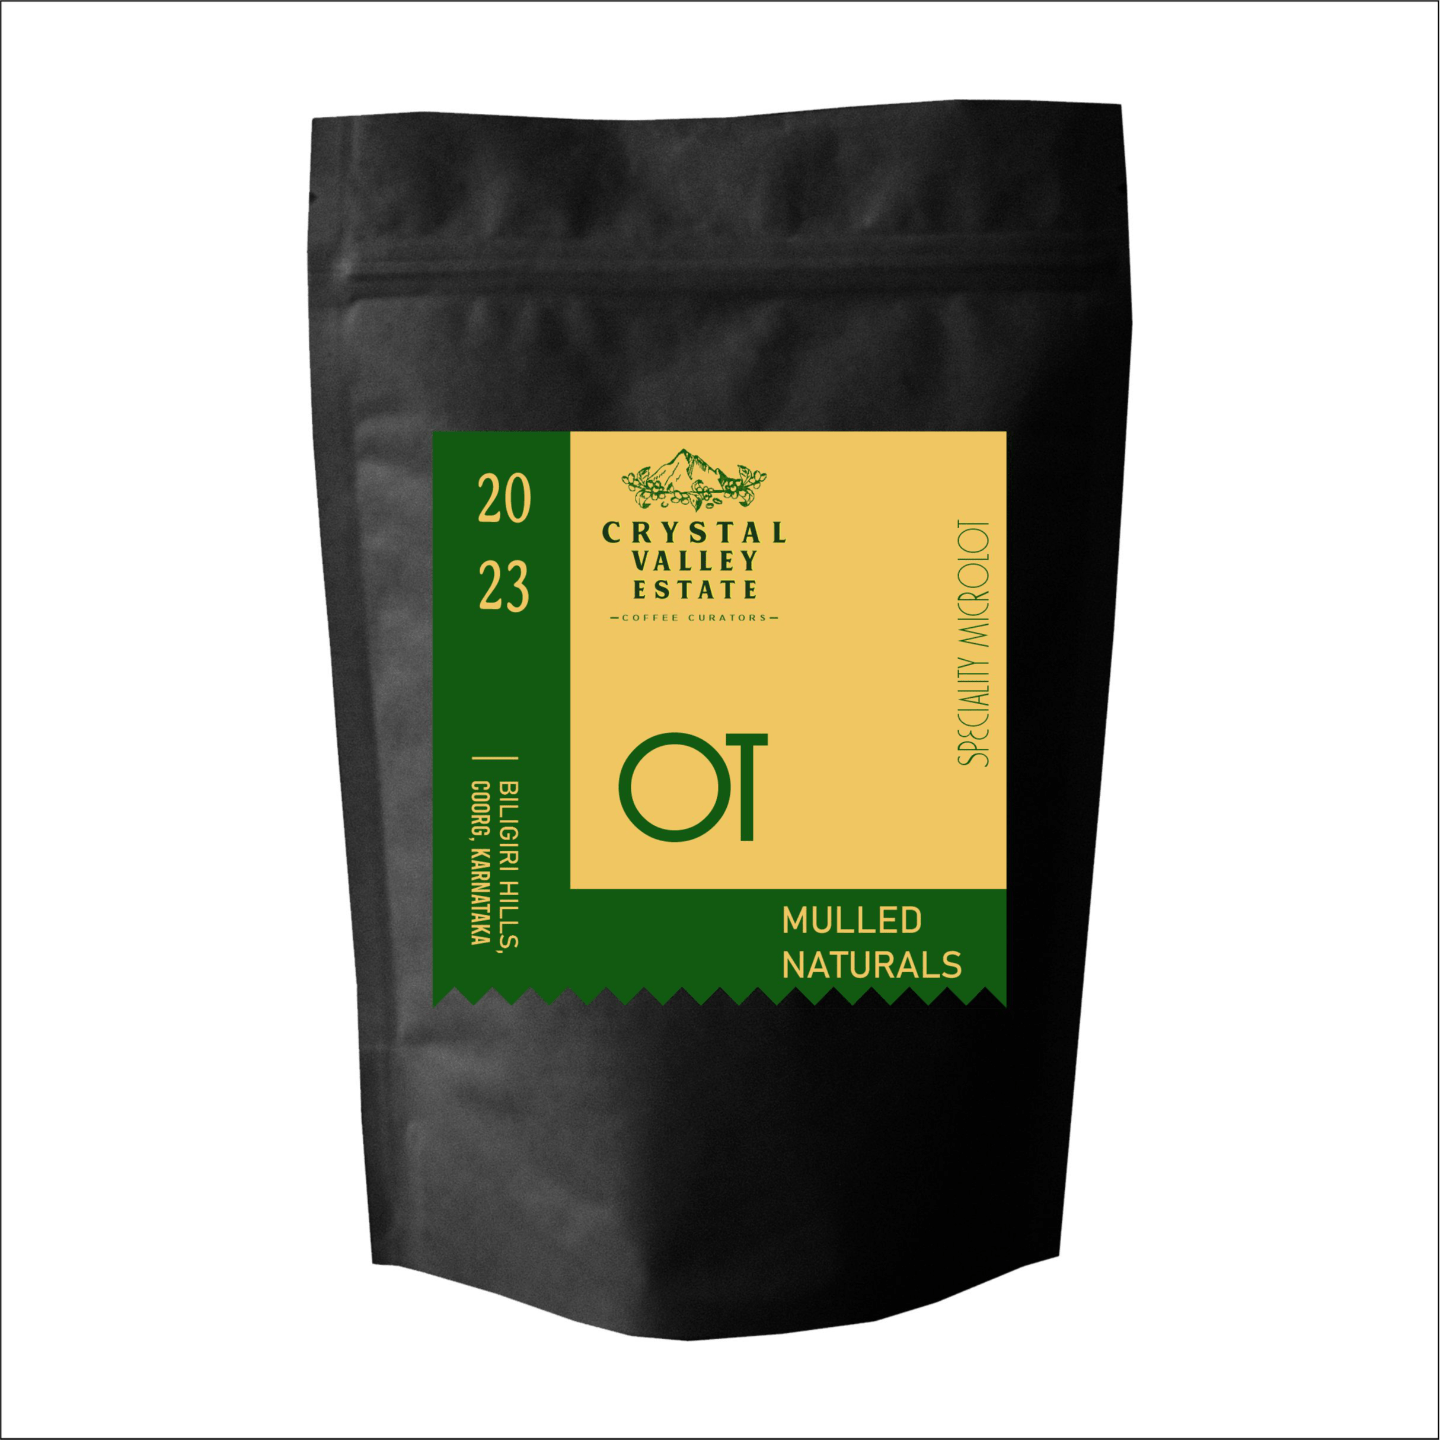 CRYSTAL VALLEY - OT  - Mulled Naturals  - 250 gms